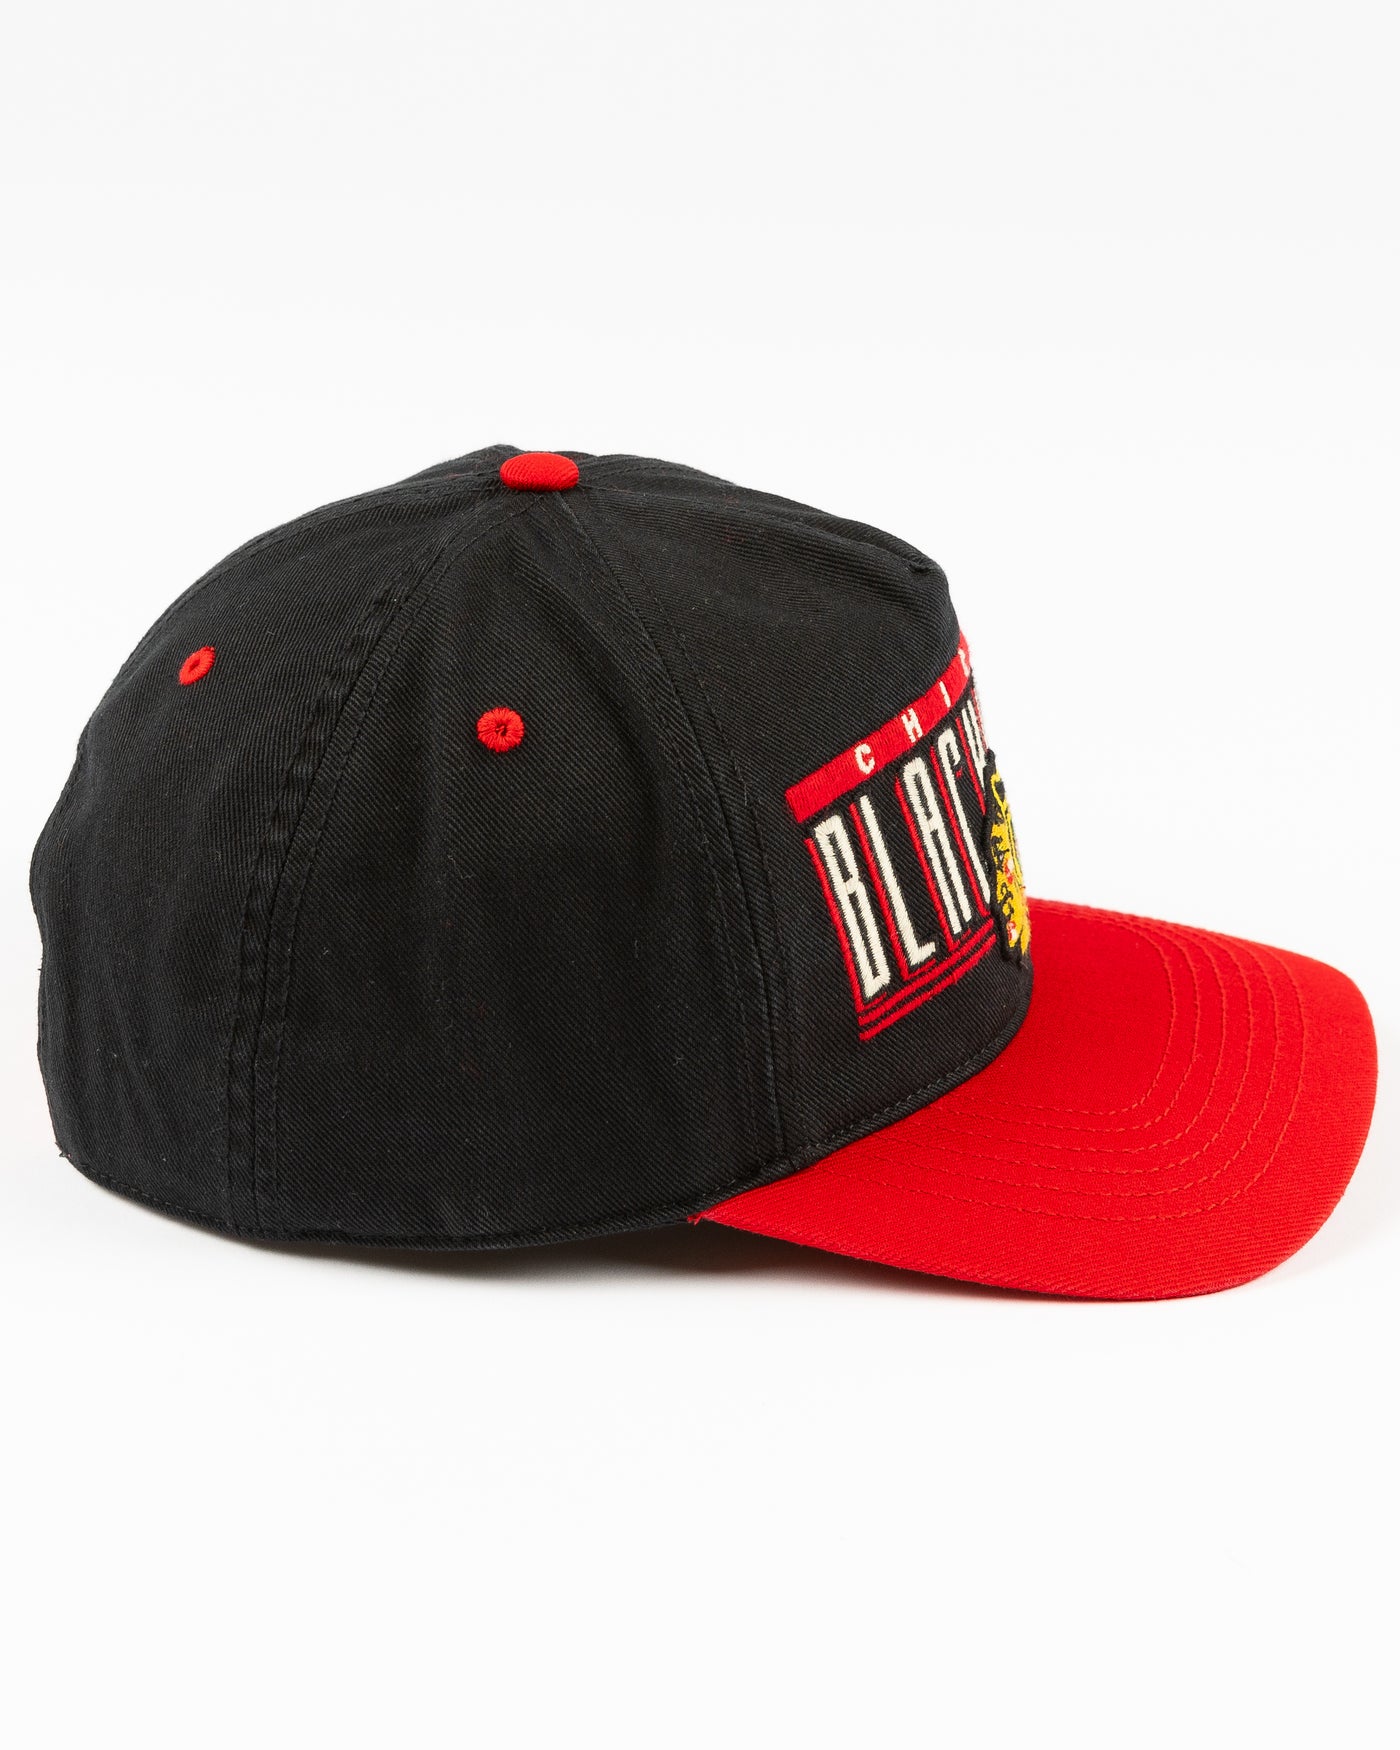 black and red '47 brand snapback hat with Chicago Blackhawks wordmark and primary logo embroidered on the front - right side lay flat